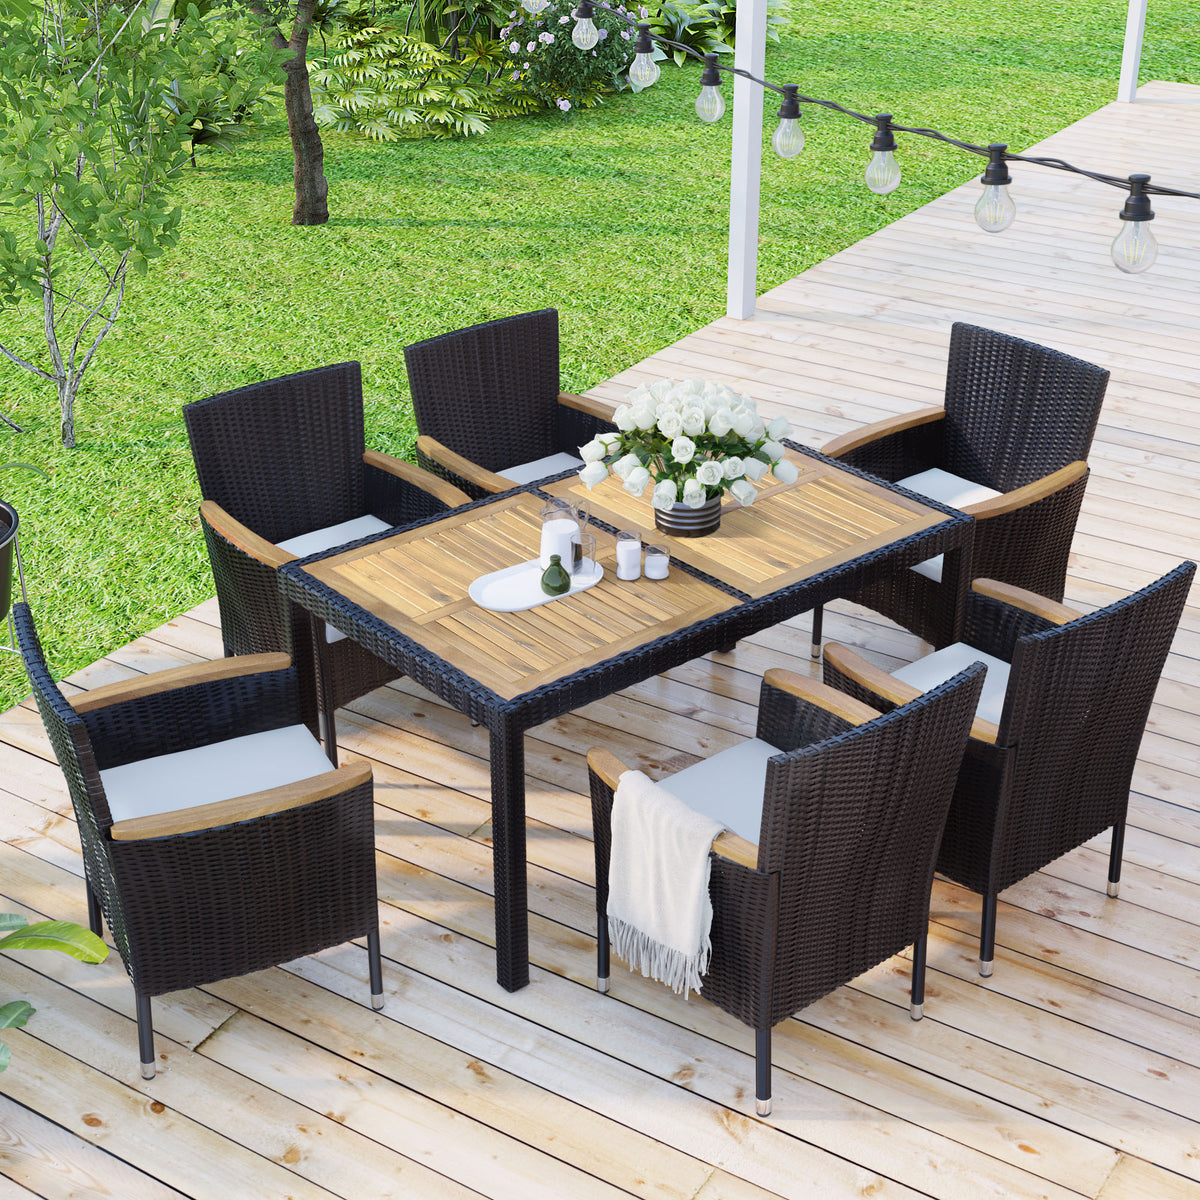 7-Piece Patio Dining Set, Garden Wicker Dining Table and Chairs Set, Acacia Wood Tabletop, Stackable Armrest Chairs with Cushions, Brown